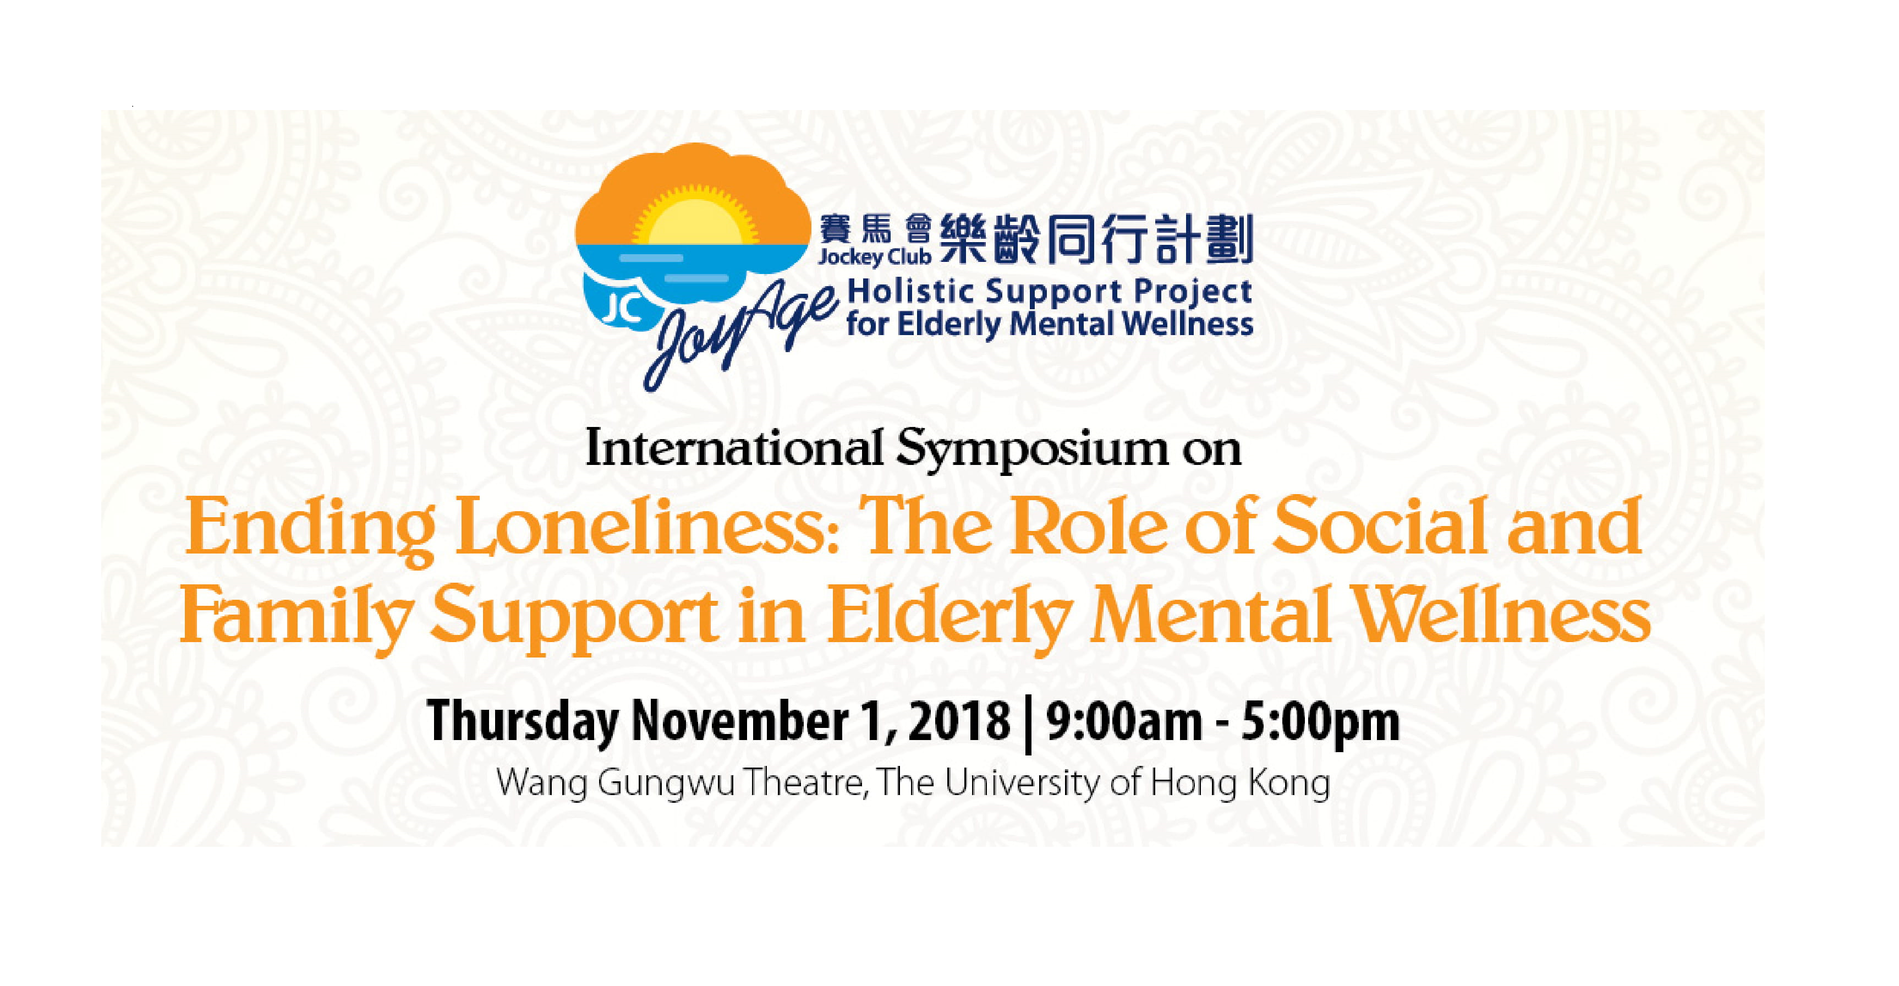 JC JoyAge International Symposium on Ending Loneliness: The Role of Social and Family Support in Elderly Mental Wellness